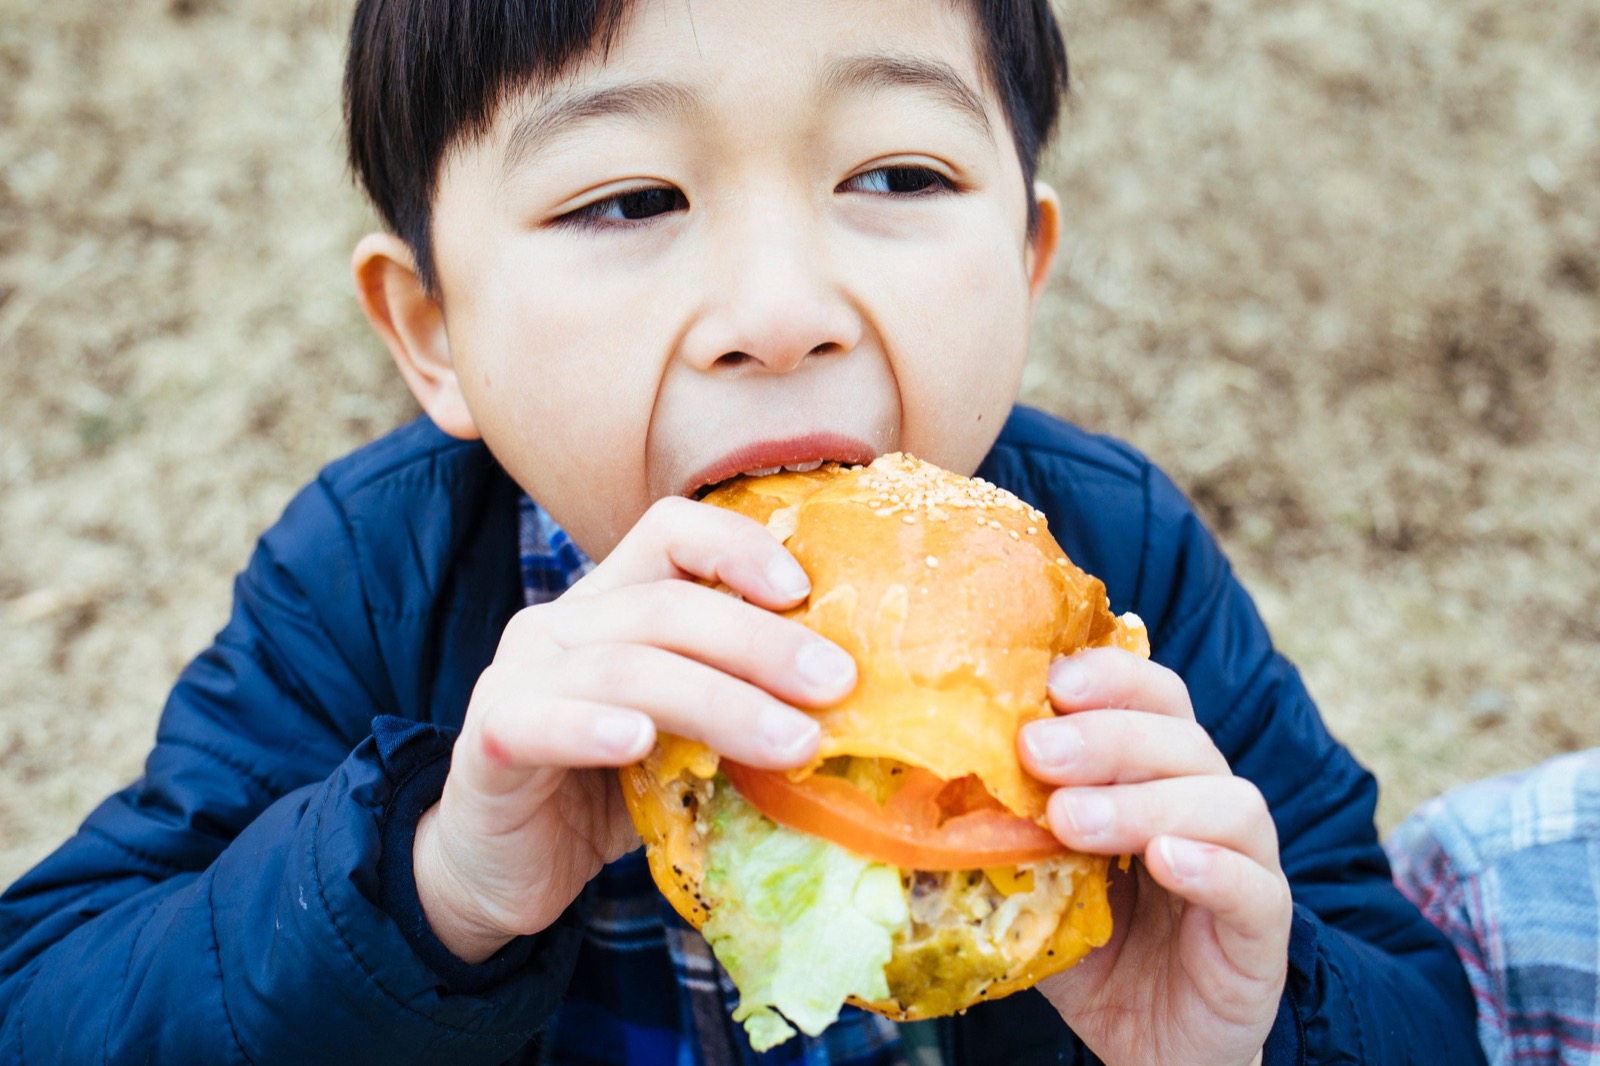 Could You Actually Go on a Vegan, Vegetarian or Pescatarian Diet? Child Eating Hamburger